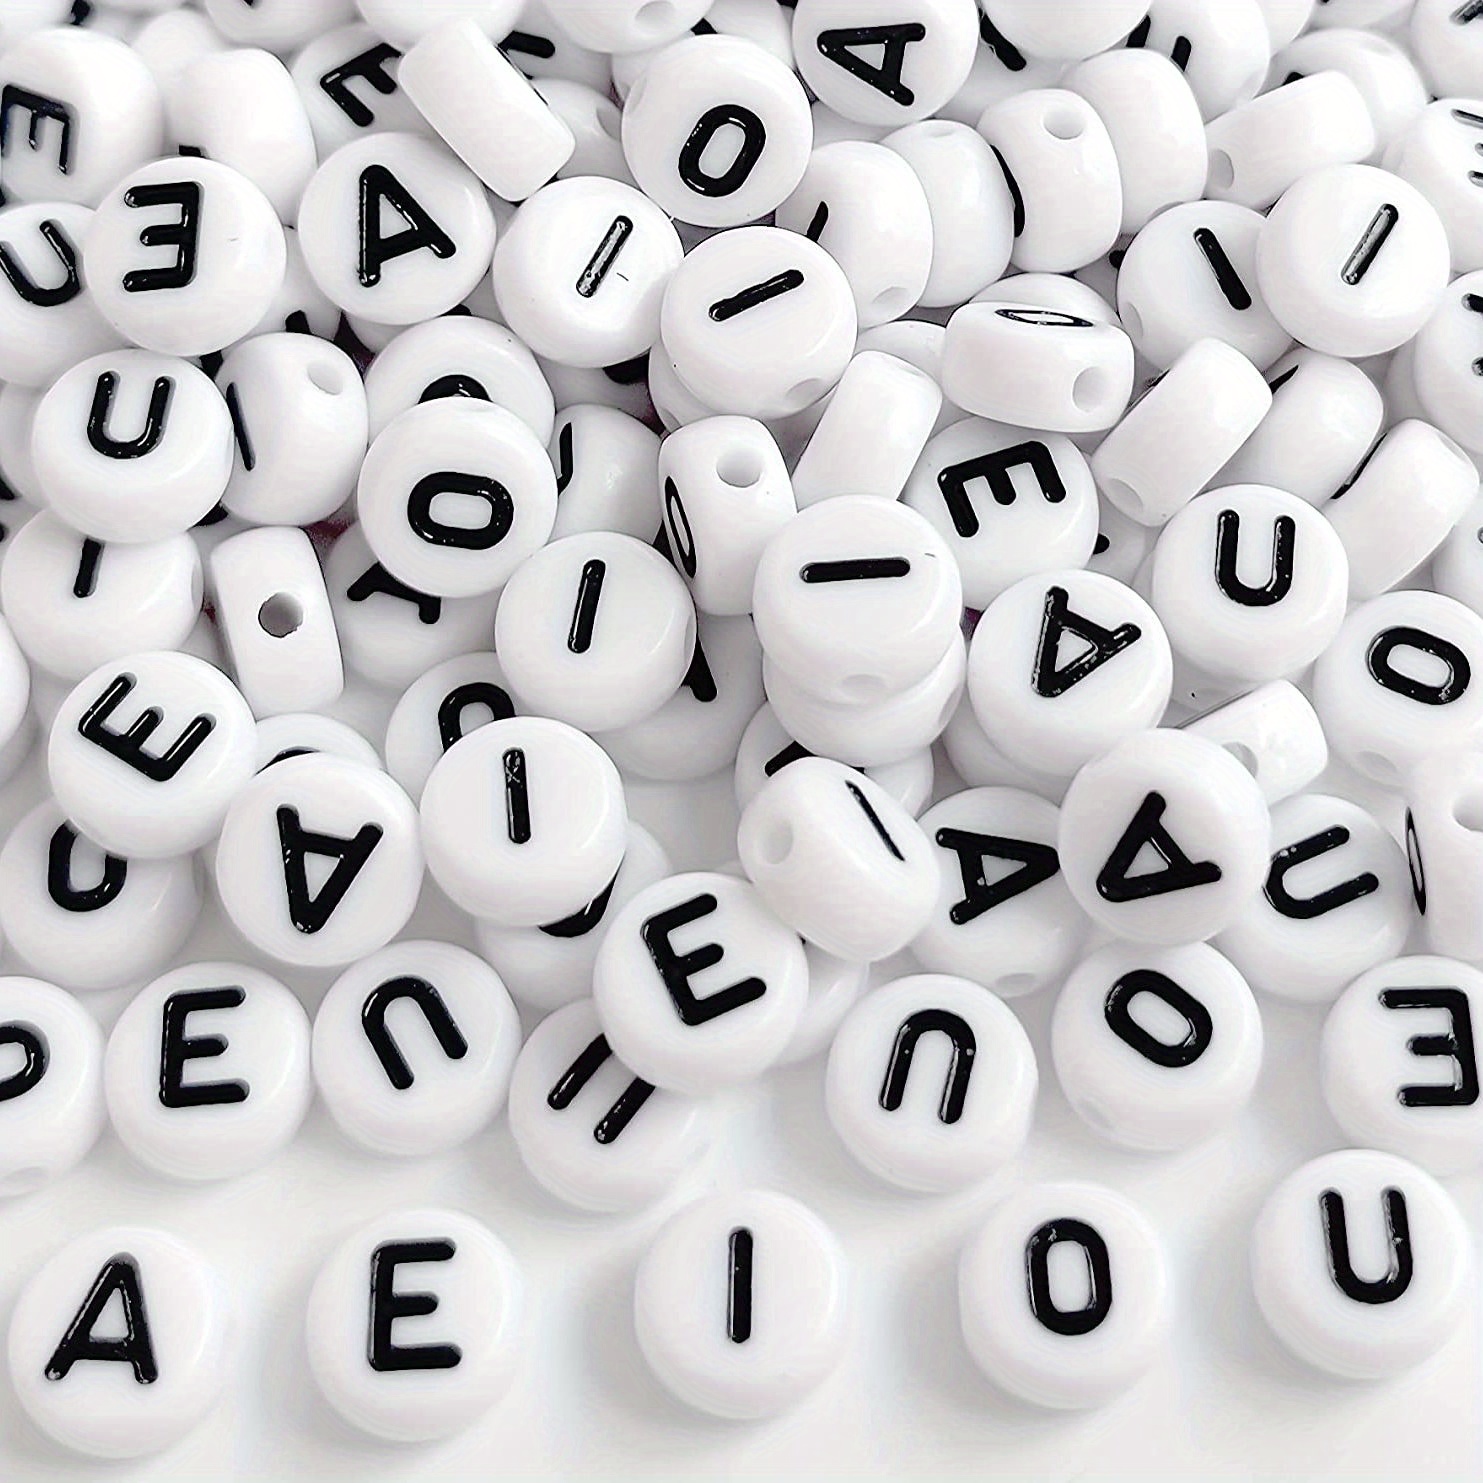  500PCS Acrylic Square Letter Beads Color Letter On White  Background for Jewelry Making Alphabet Beads for Bracelets Kit Letters  Beads for Necklace Making (Color Characters)